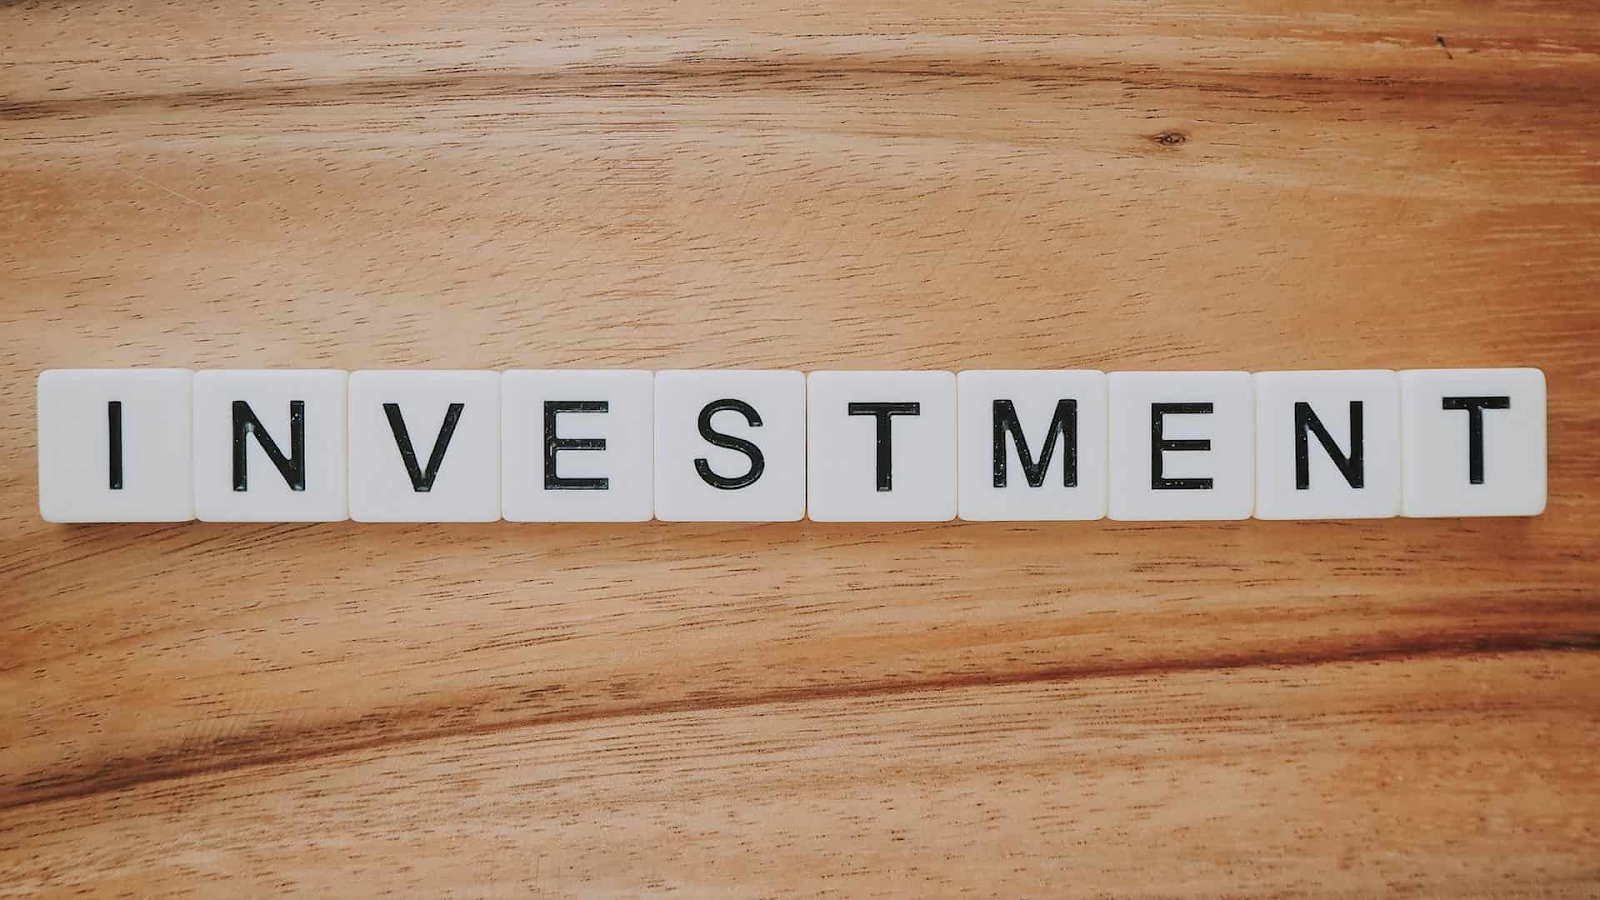 Tiles spelling out investment